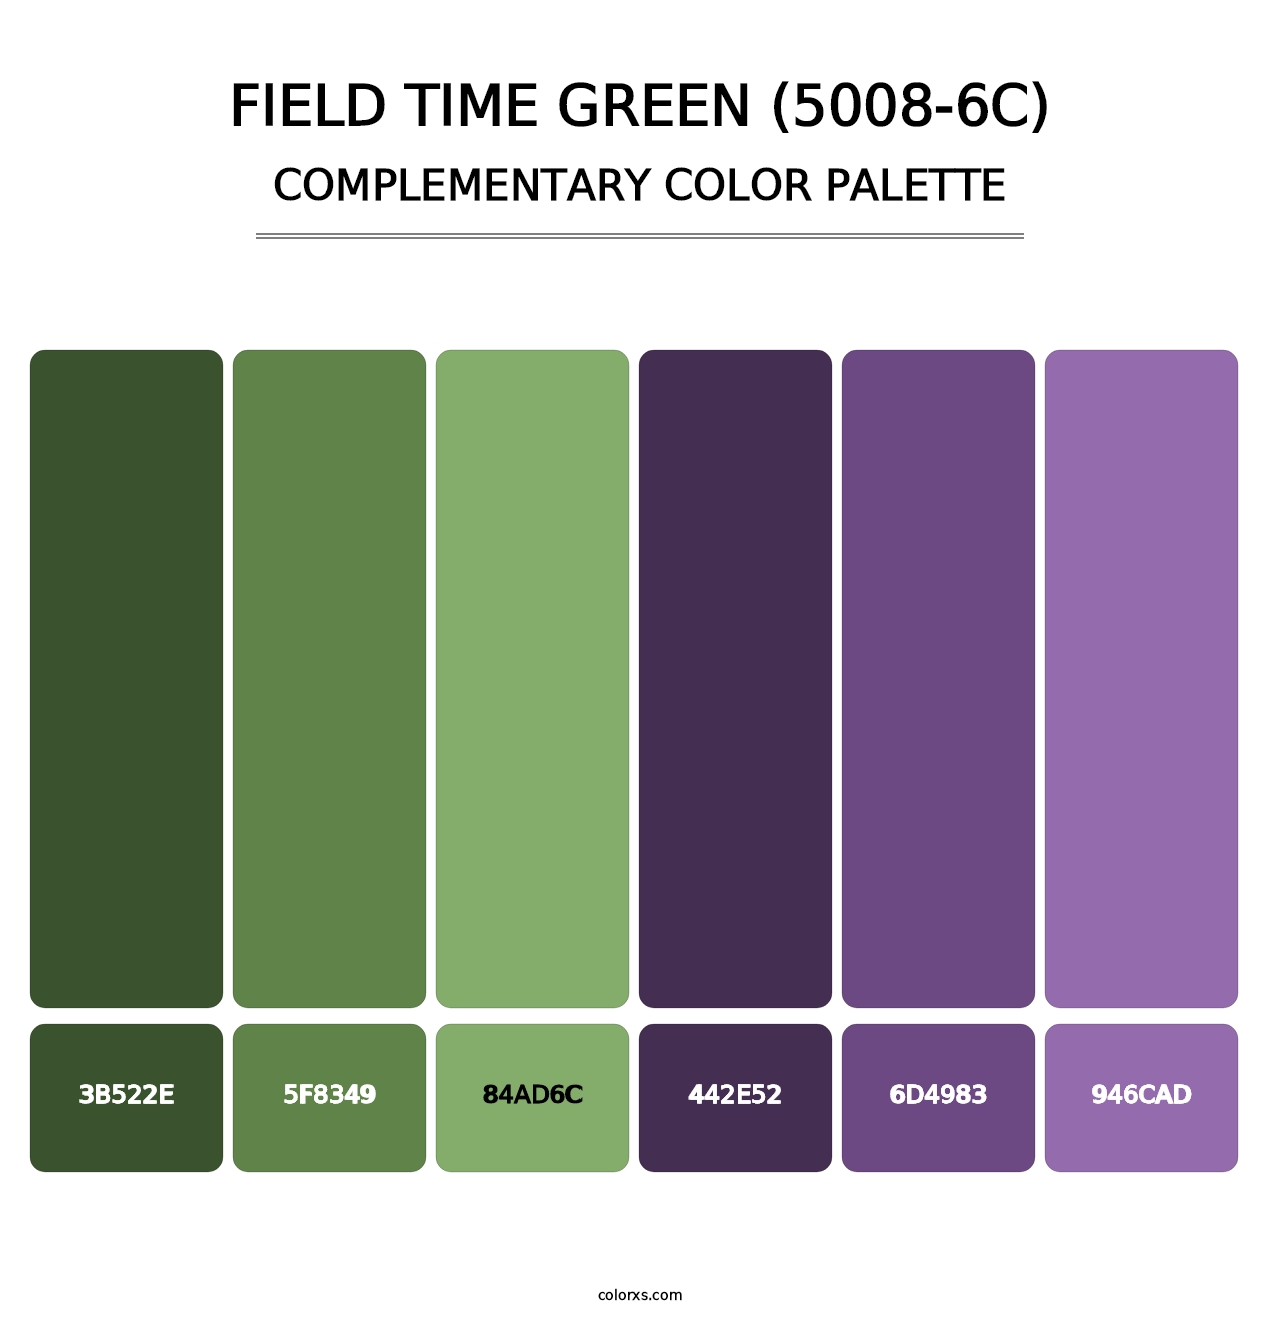 Field Time Green (5008-6C) - Complementary Color Palette